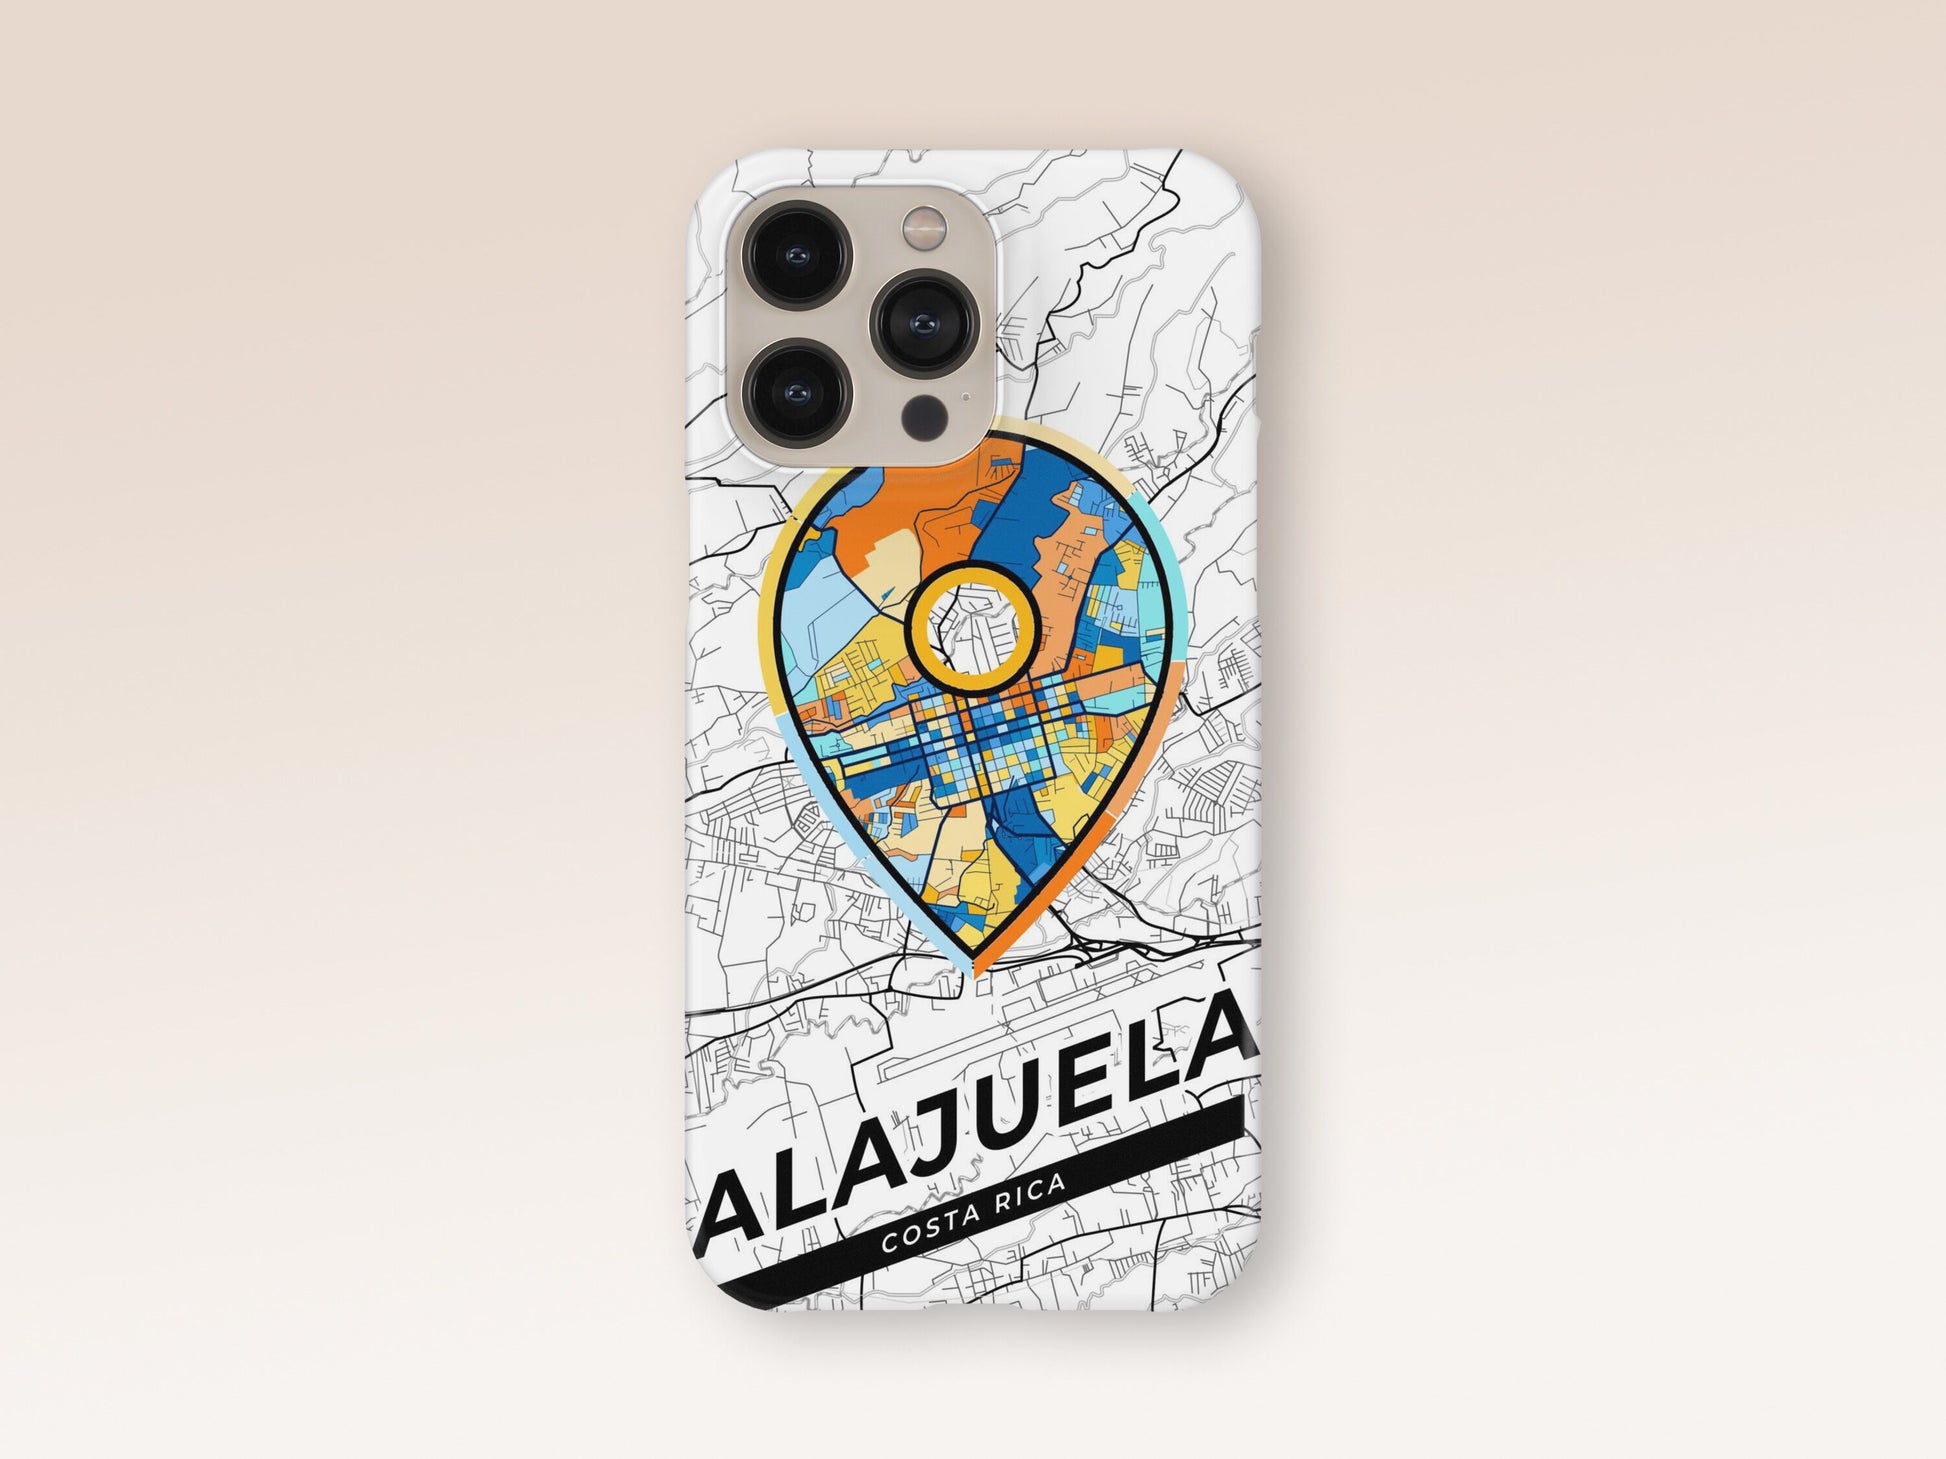 Alajuela Costa Rica slim phone case with colorful icon. Birthday, wedding or housewarming gift. Couple match cases. 1